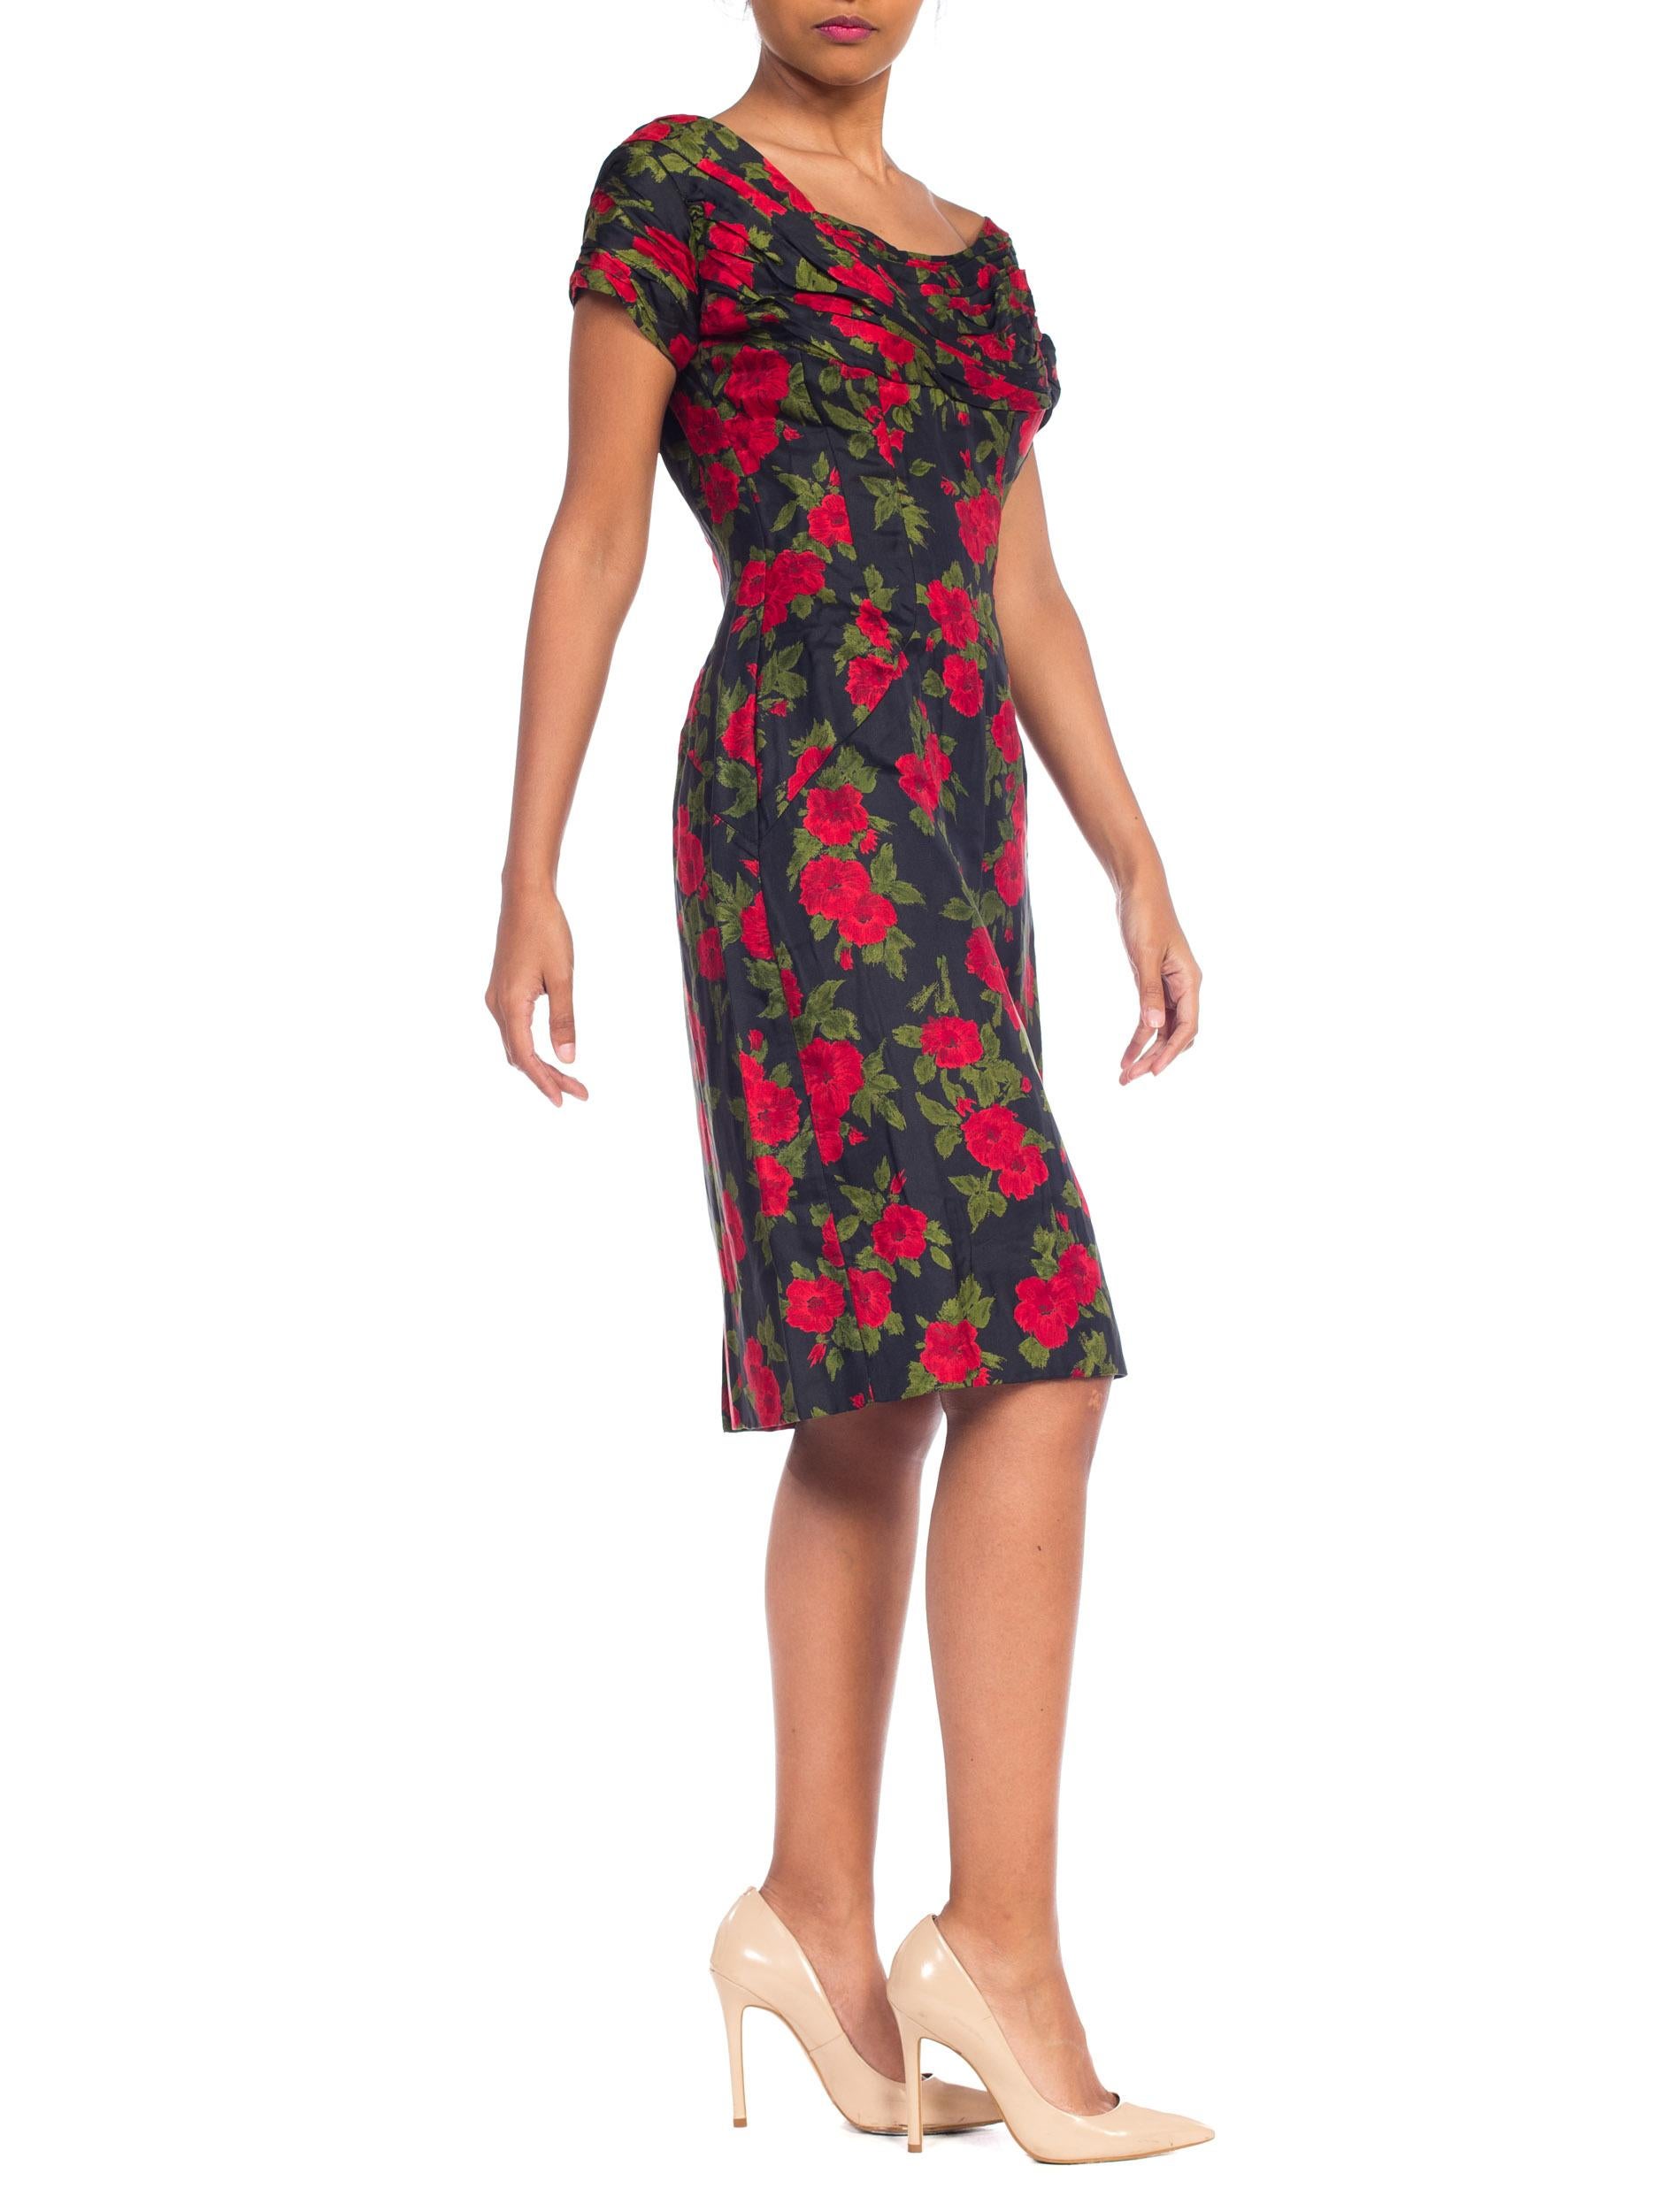 1950S DOLCE & GABBANA Style Silk Twill Red Black Classic Rose Floral Printed Dr For Sale 1